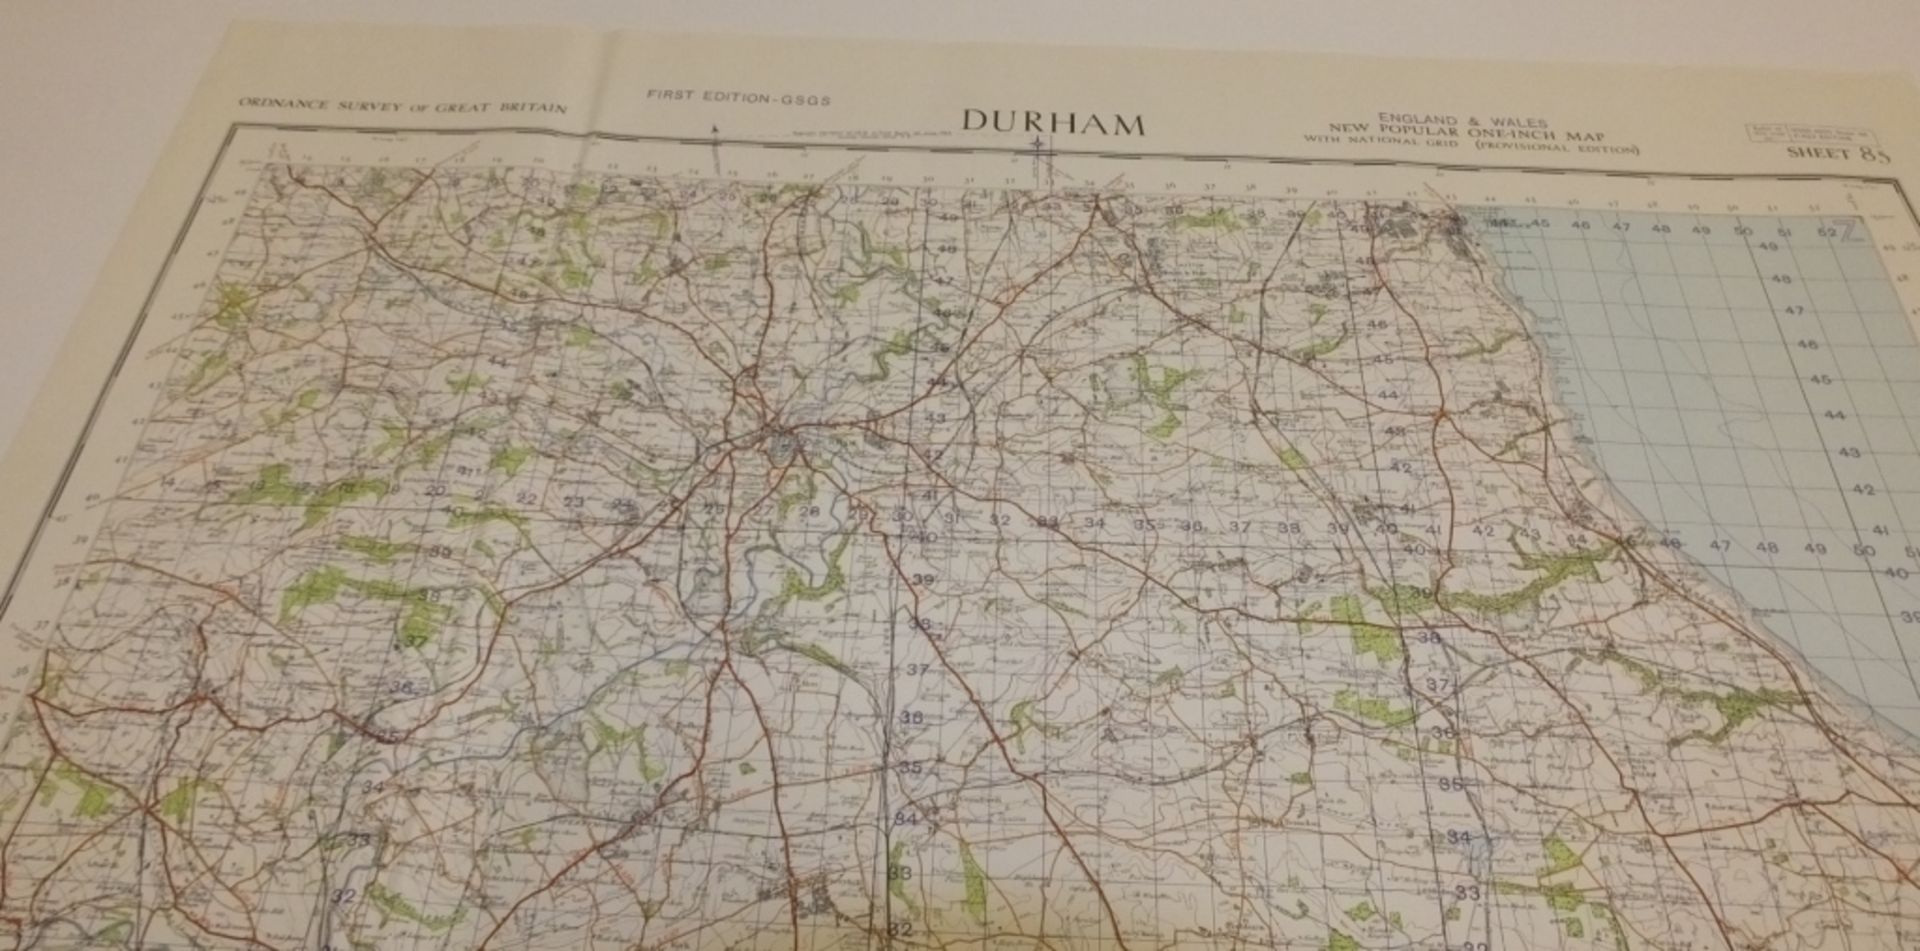 26x ENGLAND & WALES MAP DURHAM 1INCH 1MILE 1954 1ST EDITION 4620GSGS SHEET 85 - Image 2 of 4